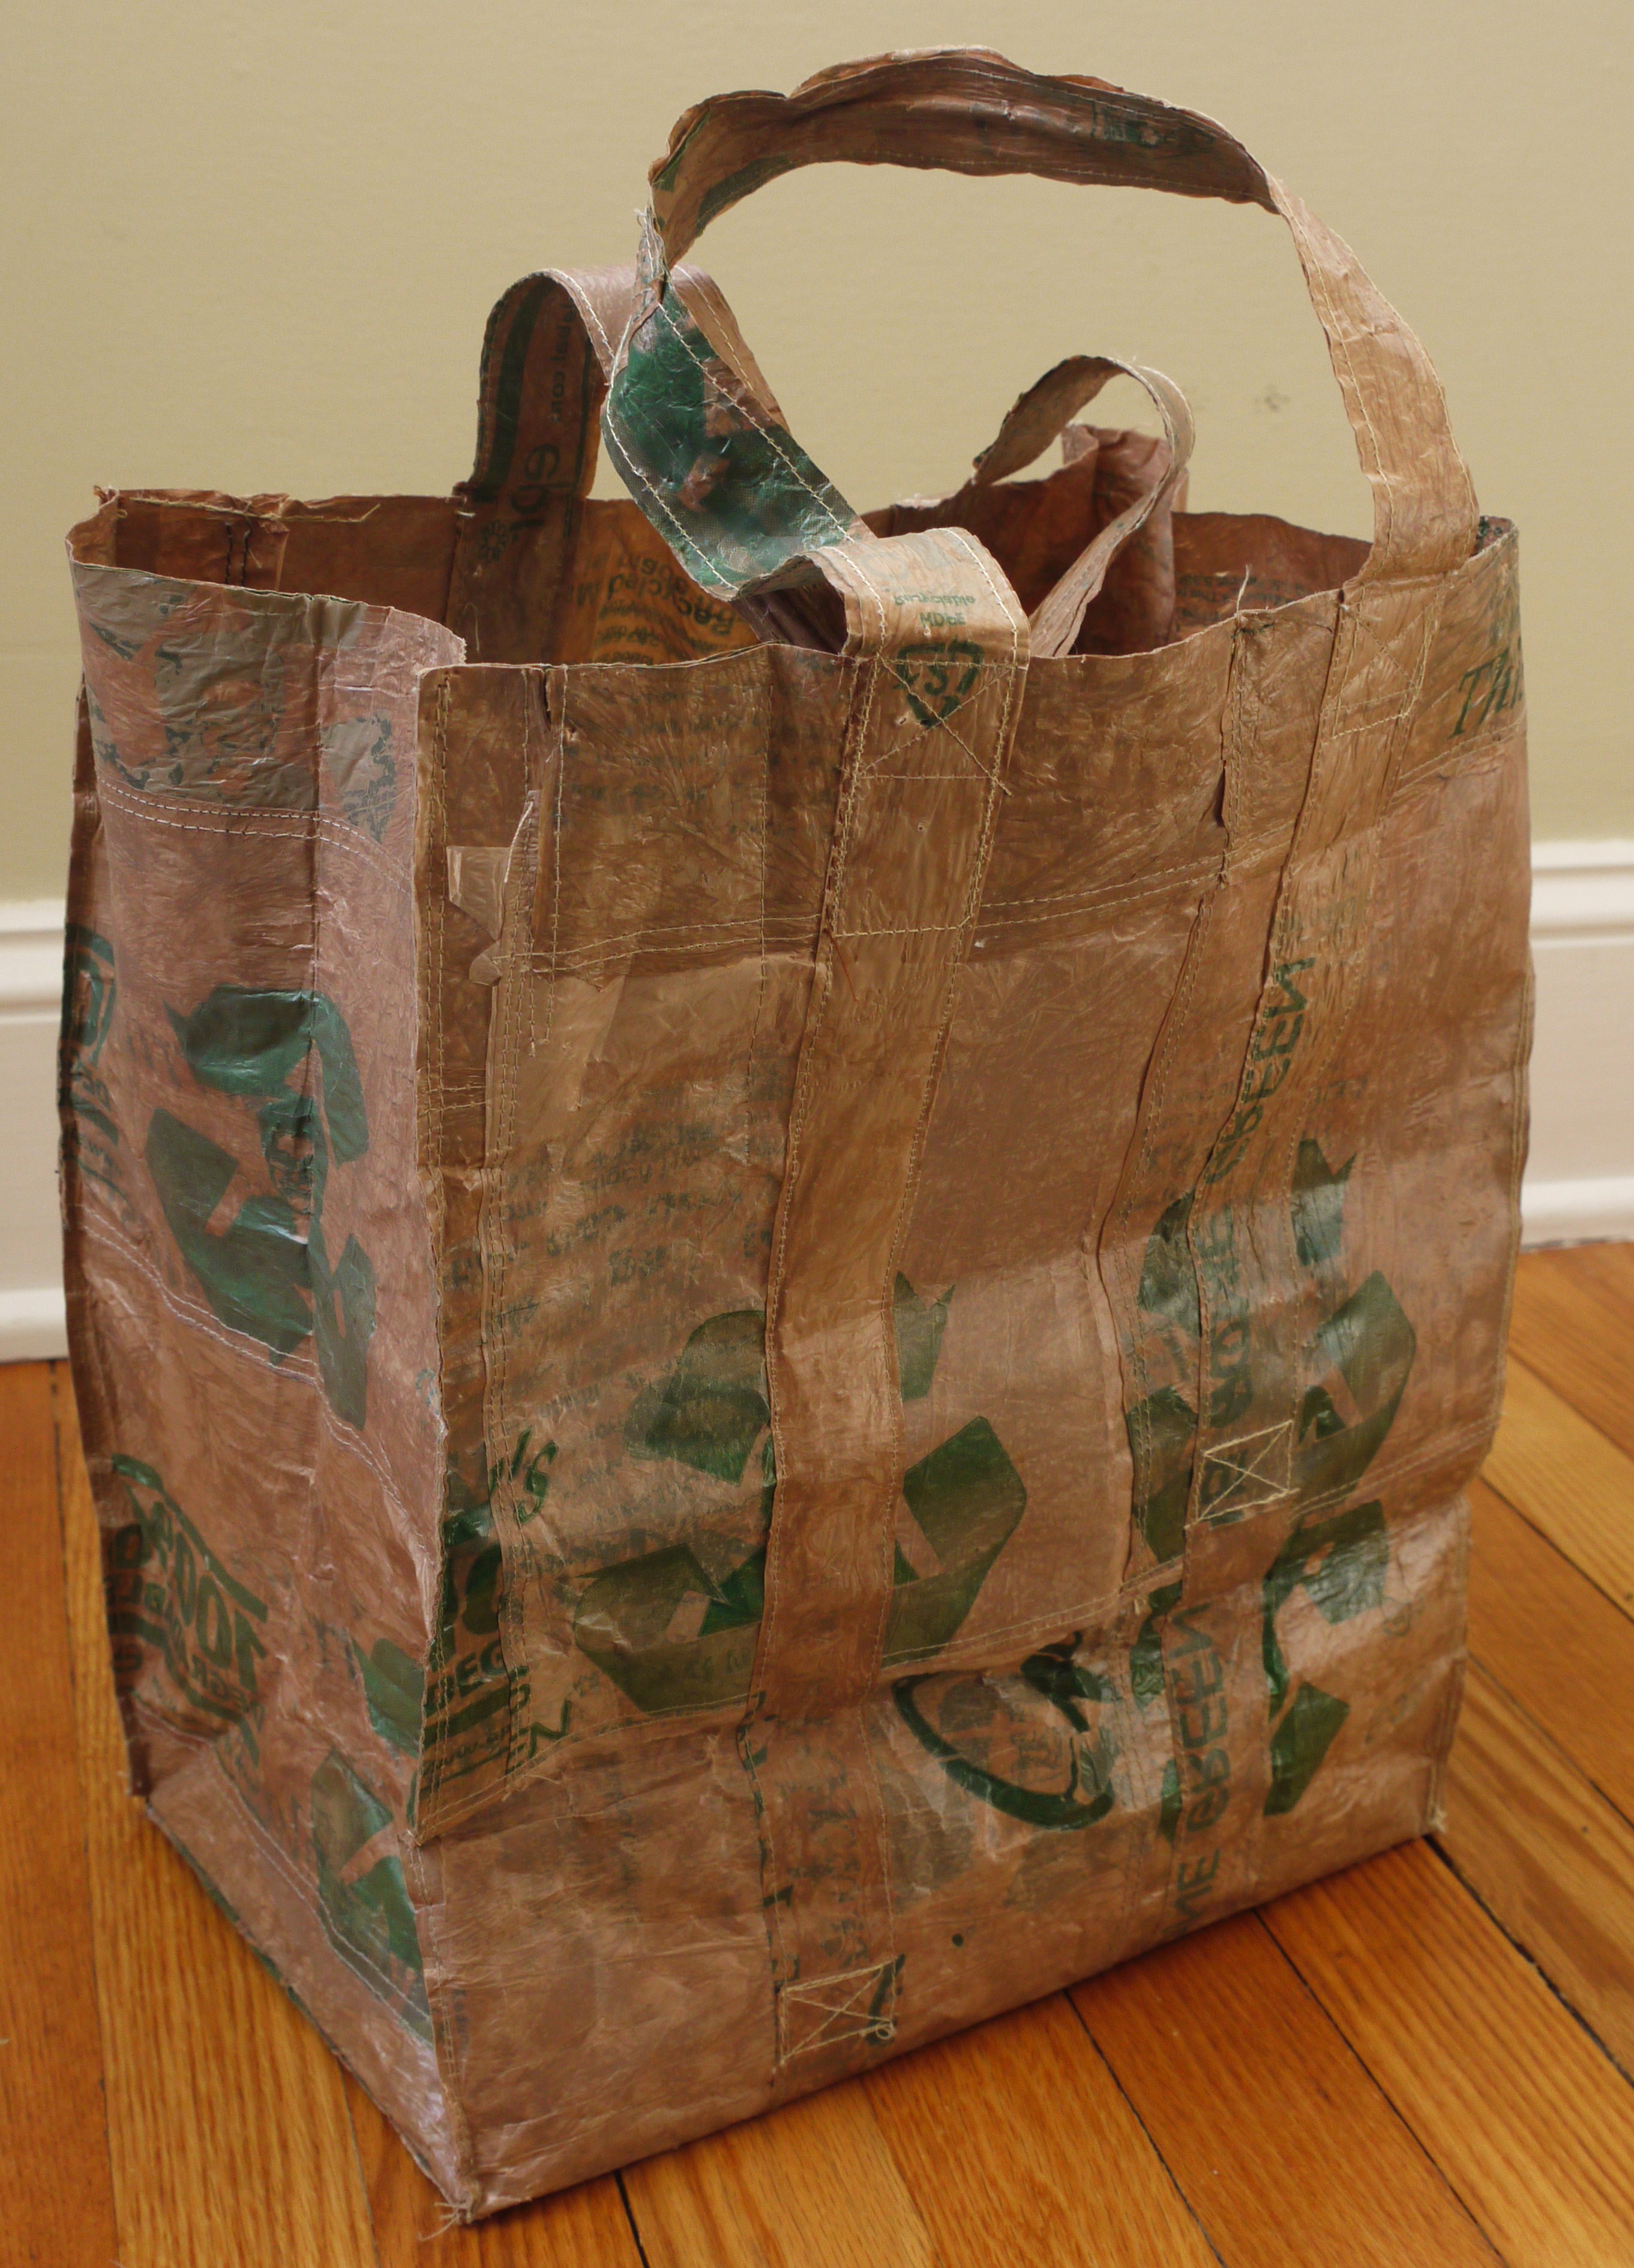 This reusable grocery bag is made with plastic bags that were fused ...